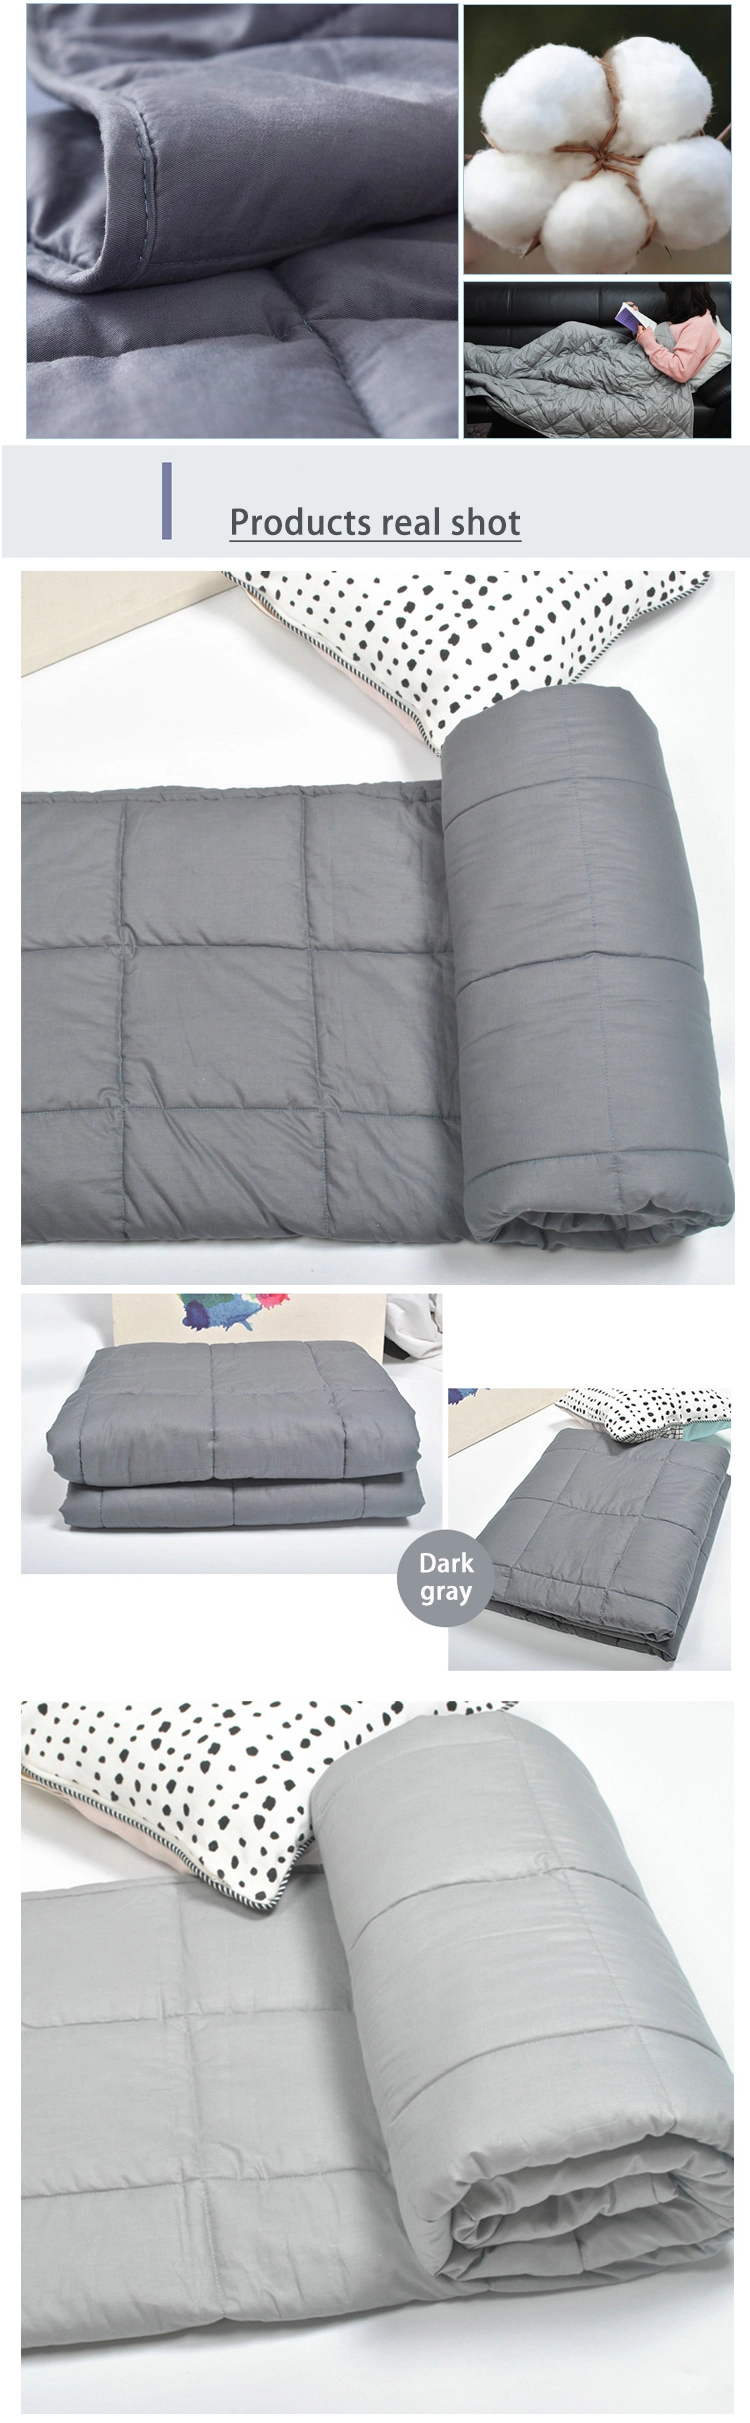 CE Certificated Cooling Bamboo Cooling Adult Kids Weighted Blanket for All Season